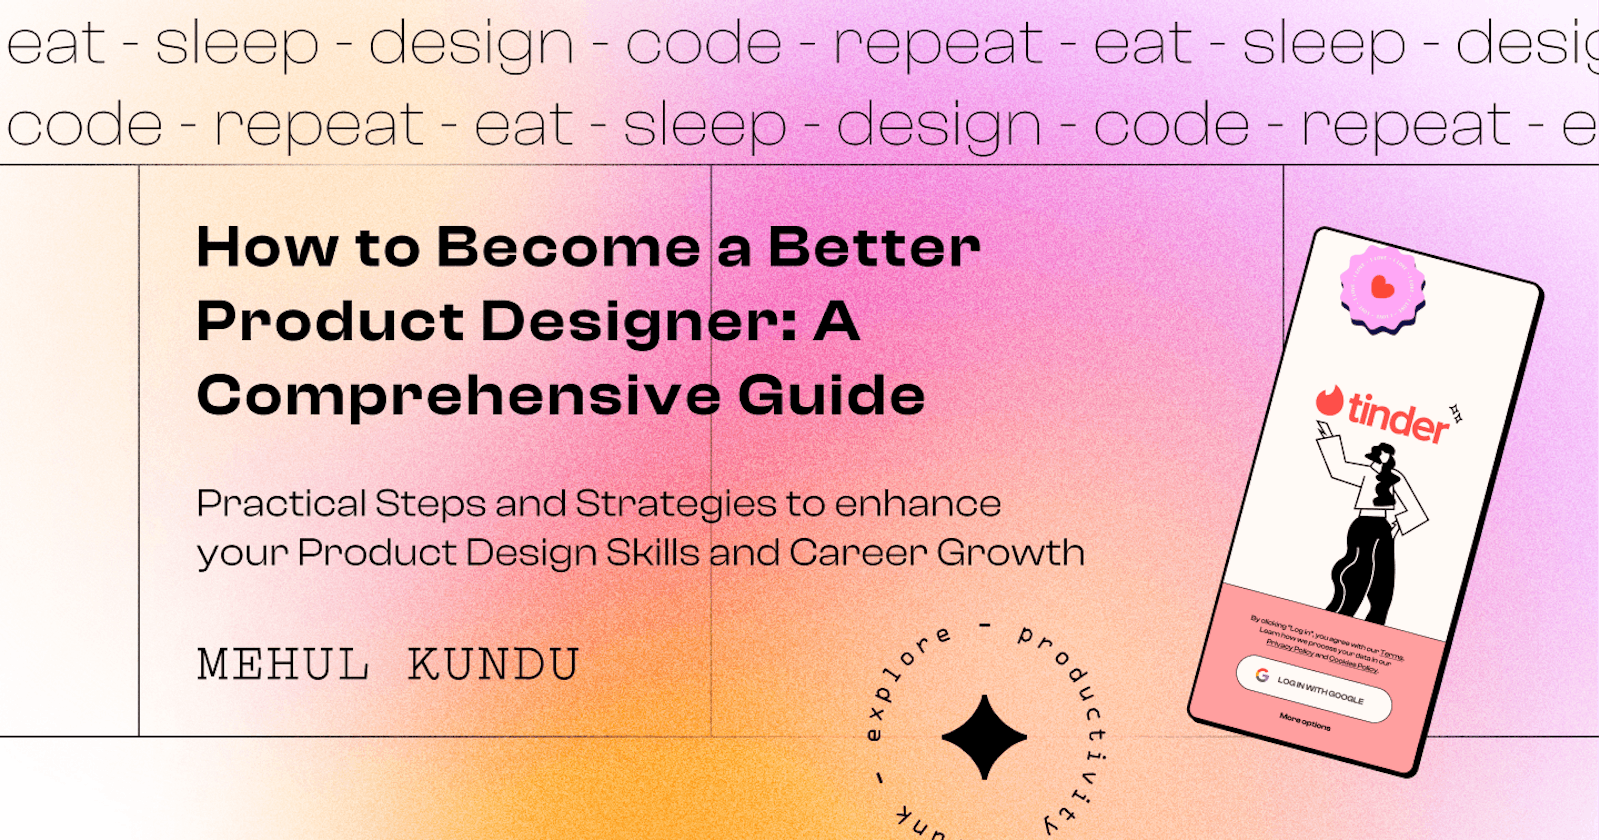 How to Become a Better Product Designer: A Comprehensive Guide